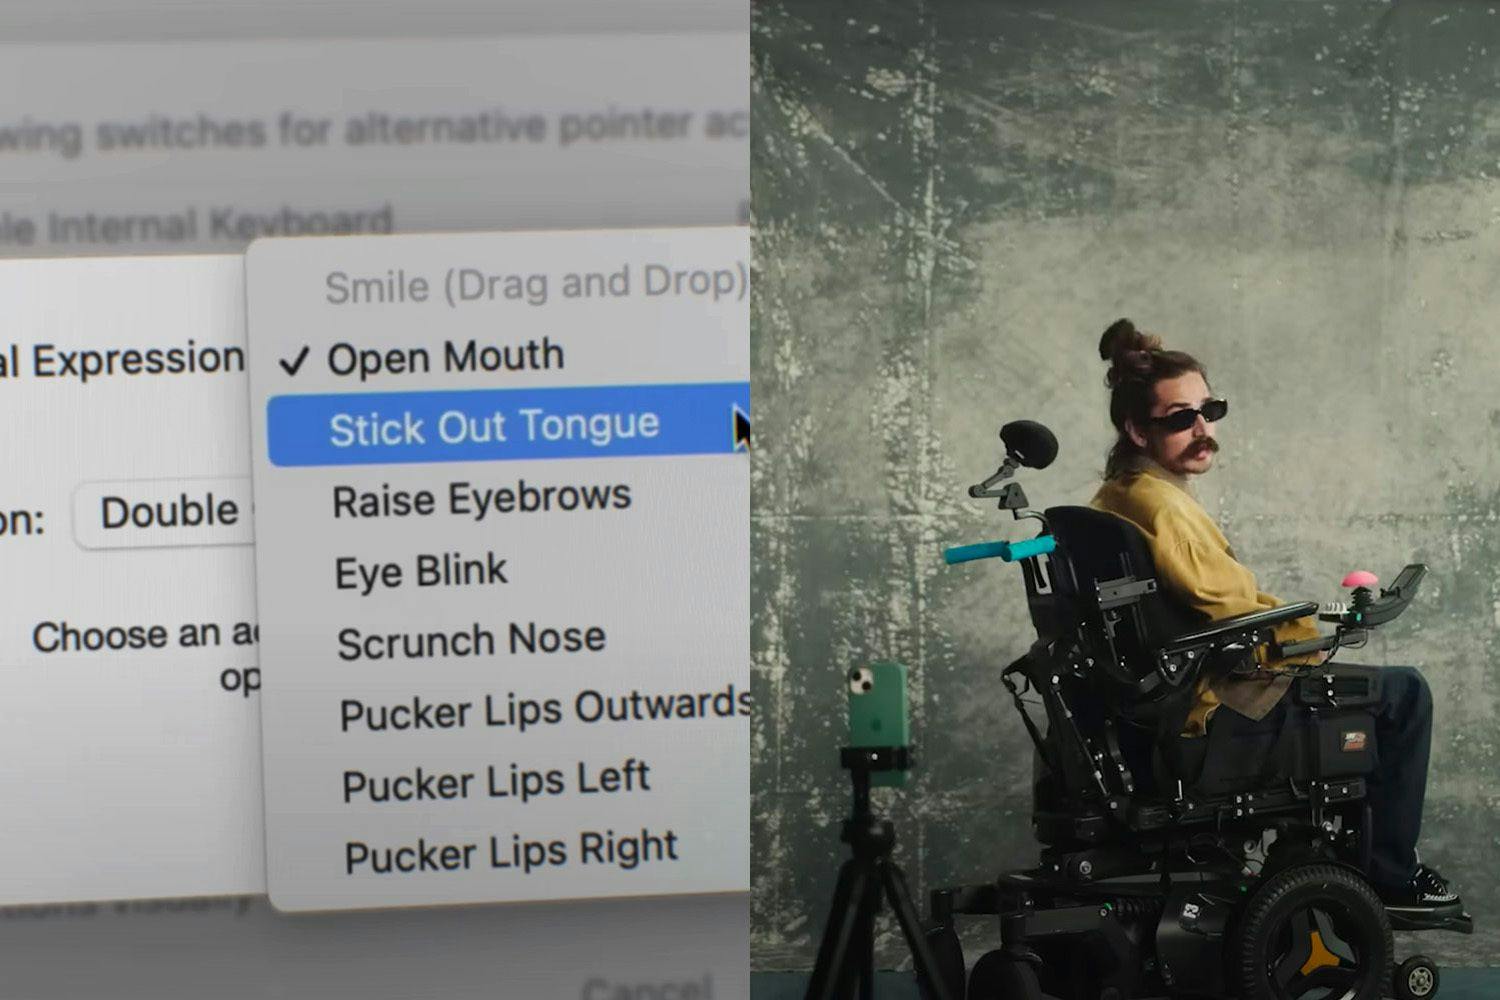 image from Apple's "The Greatest" ad. on the left is a dropdown menu featuring the option "stick out tongue" being highlighted. on the right is a picture of a man in sunglasses and a yellow sweatshirt in a wheelchair posing for a photo